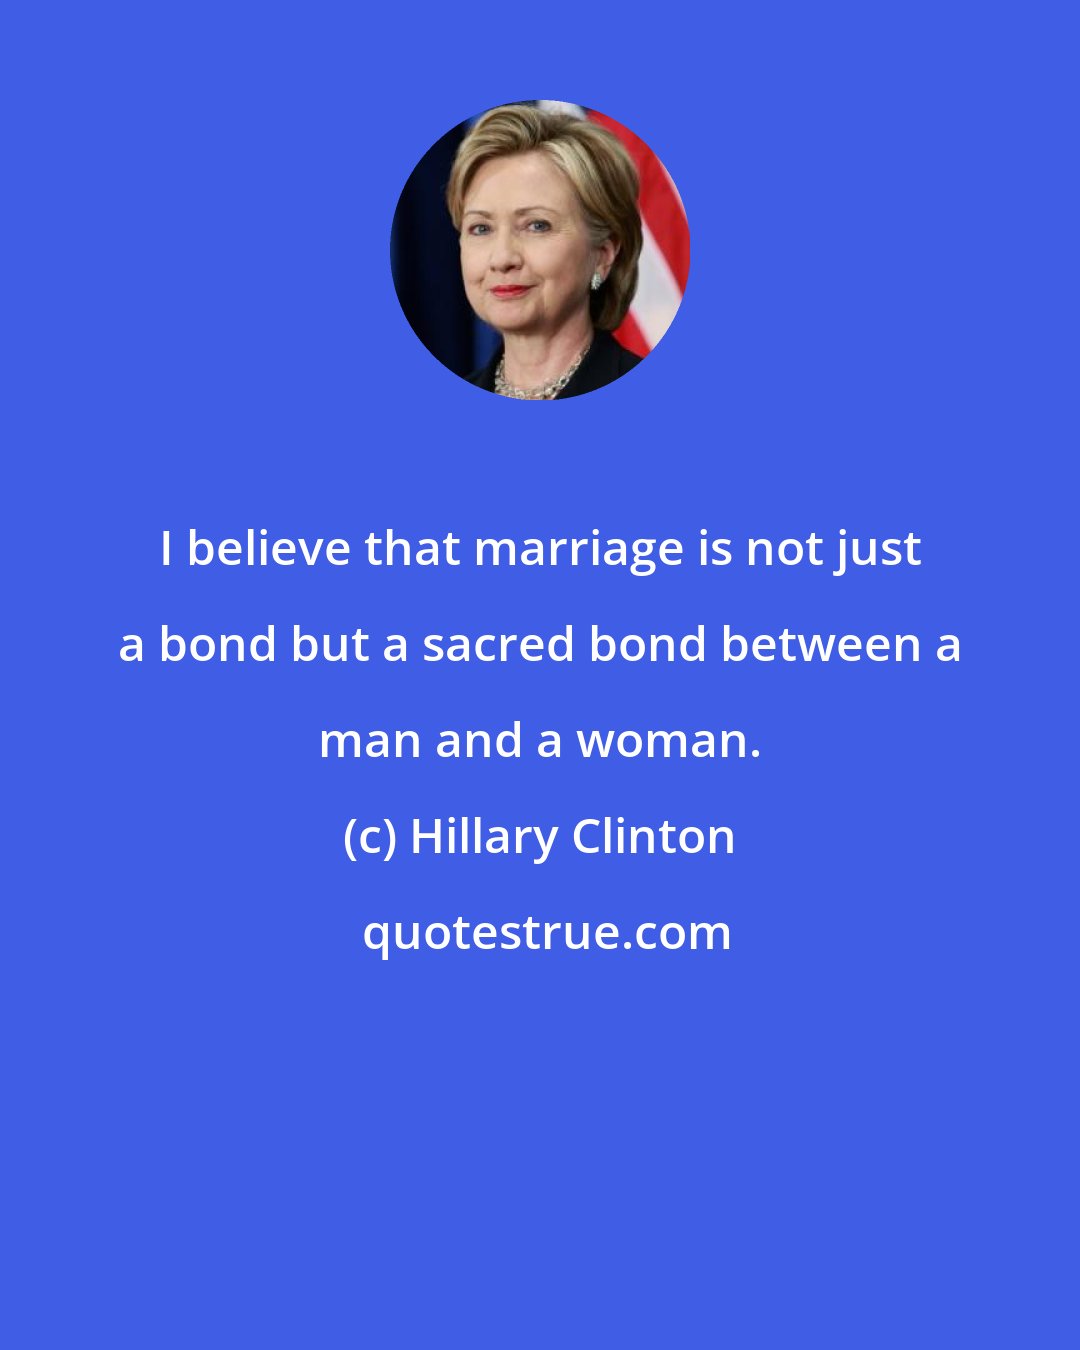 Hillary Clinton: I believe that marriage is not just a bond but a sacred bond between a man and a woman.